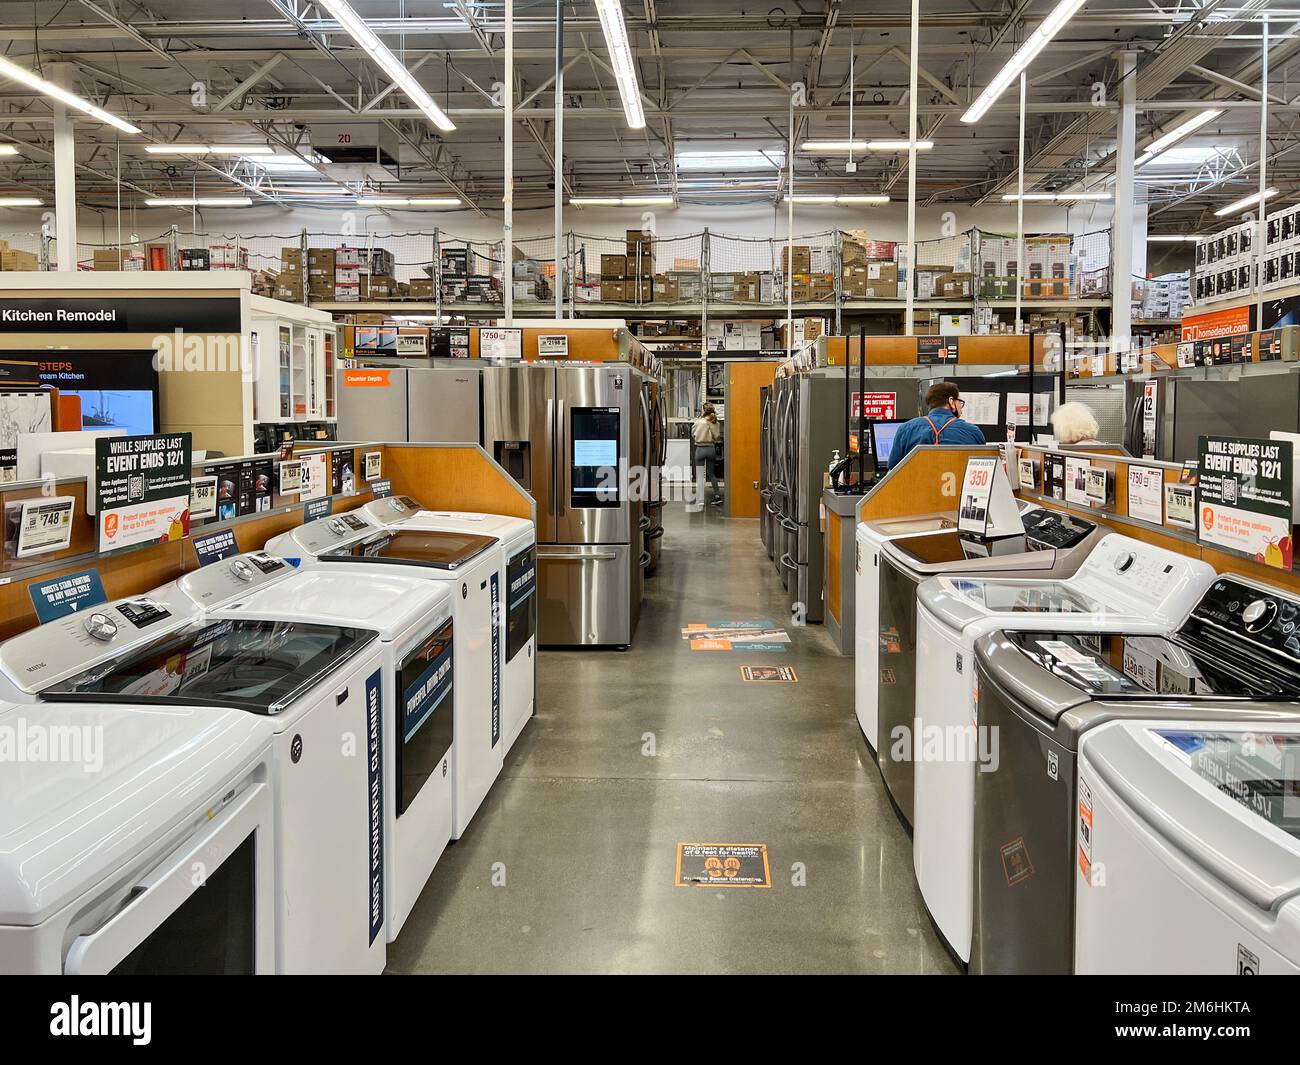 Several kitchen electronic units for sale at The Home Depot, Carmel Valley, San Diego Stock Photo